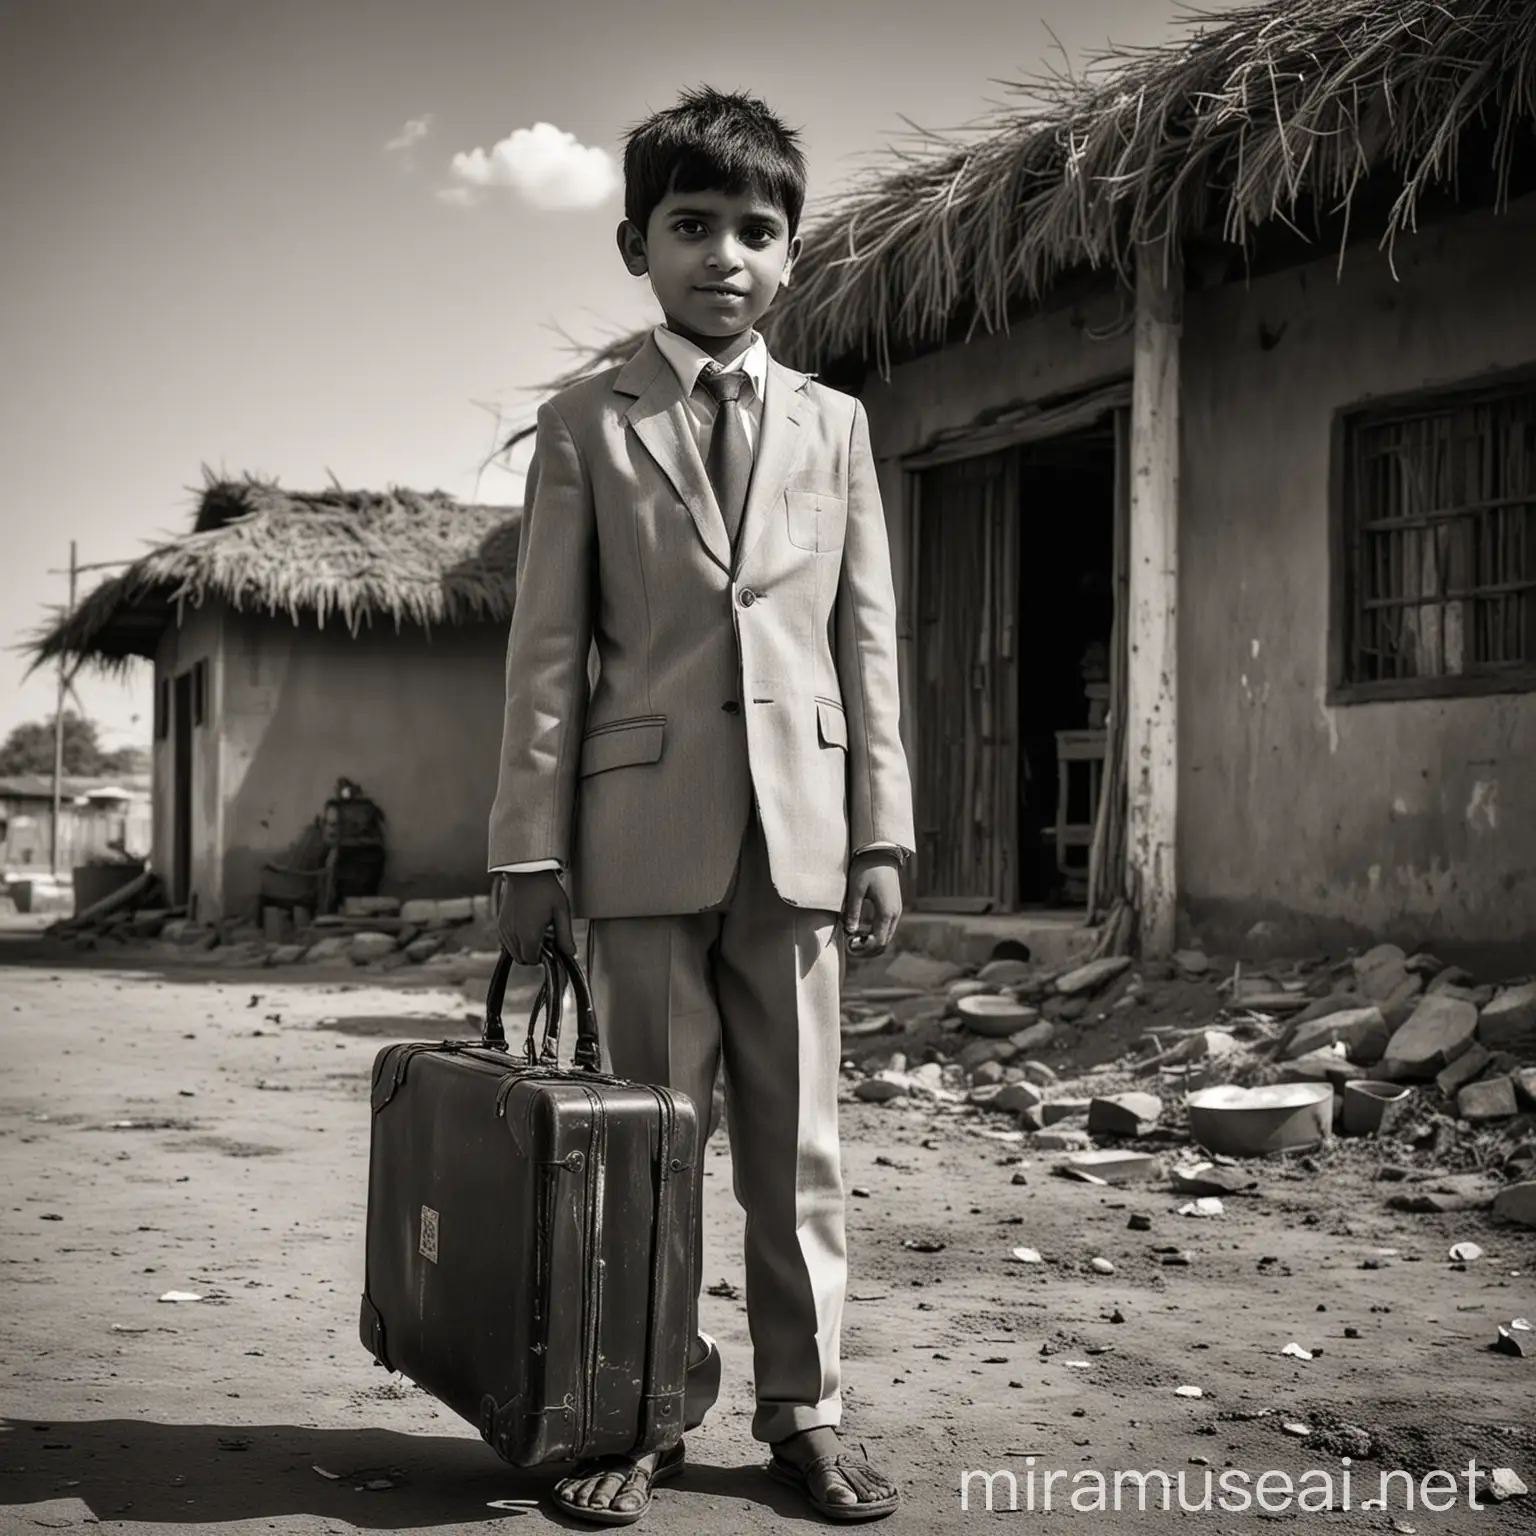 The thumbnail captures the inspiring transformation of an Indian Marwadi boy, born in 1988, who rose from poverty to become one of the richest businessmen in India. The left side of the thumbnail features a black and white image of the boy in tattered clothes, symbolizing his humble beginnings in a poor Marwadi family. His eyes are filled with determination and hope. The background is a rural setting, with a thatched roof hut, highlighting his modest origins.  On the right side, a vibrant, full-color image showcases the same boy, now a confident, well-dressed businessman. He is standing in front of a luxurious office building, representing his immense success. His pose is confident, holding a briefcase in one hand and a smartphone in the other. The background includes elements of the modern cityscape, symbolizing progress and prosperity.